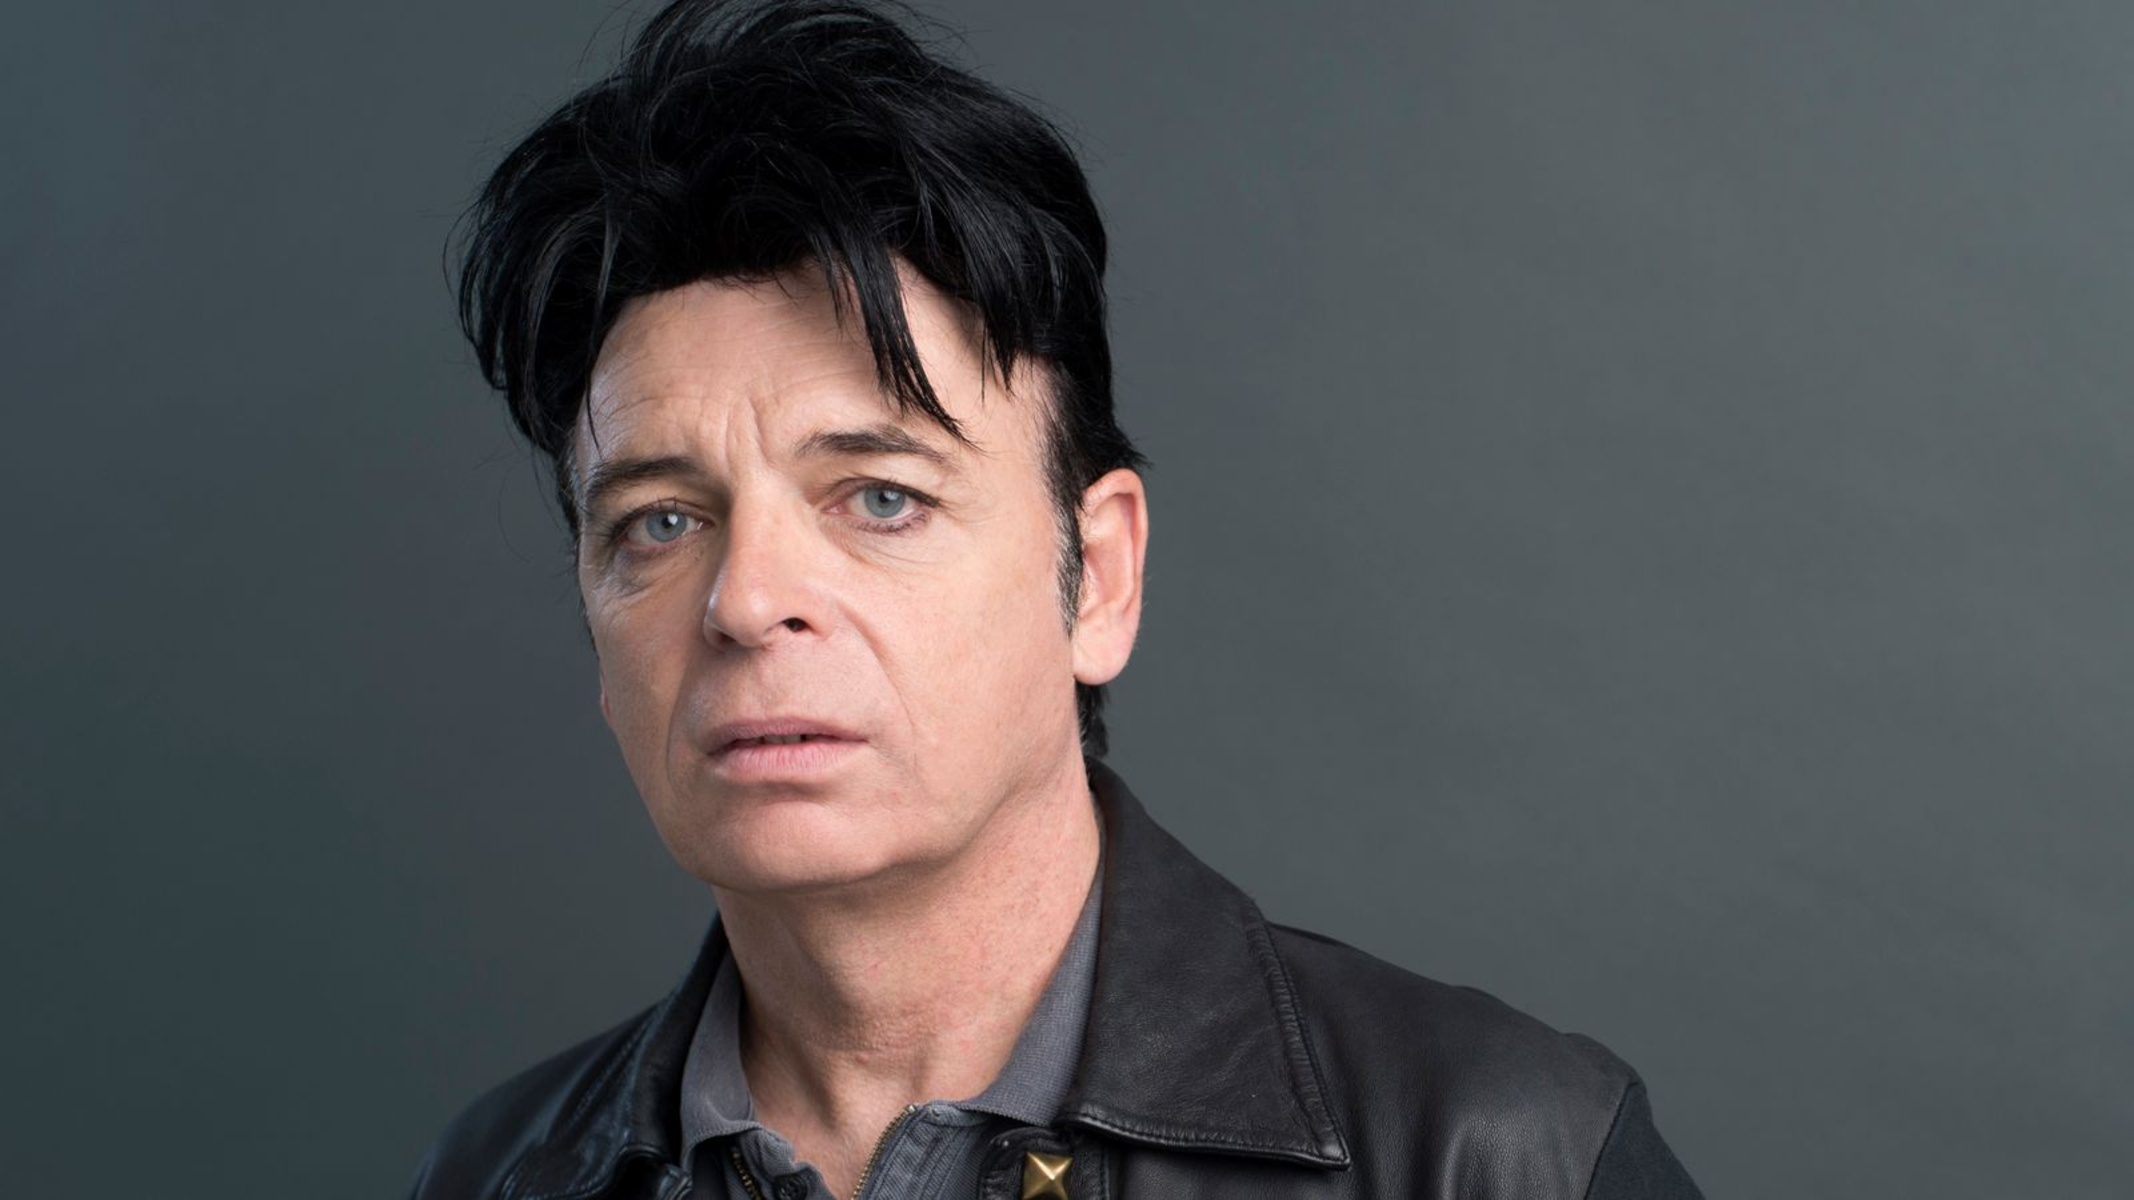 16-extraordinary-facts-about-gary-numan